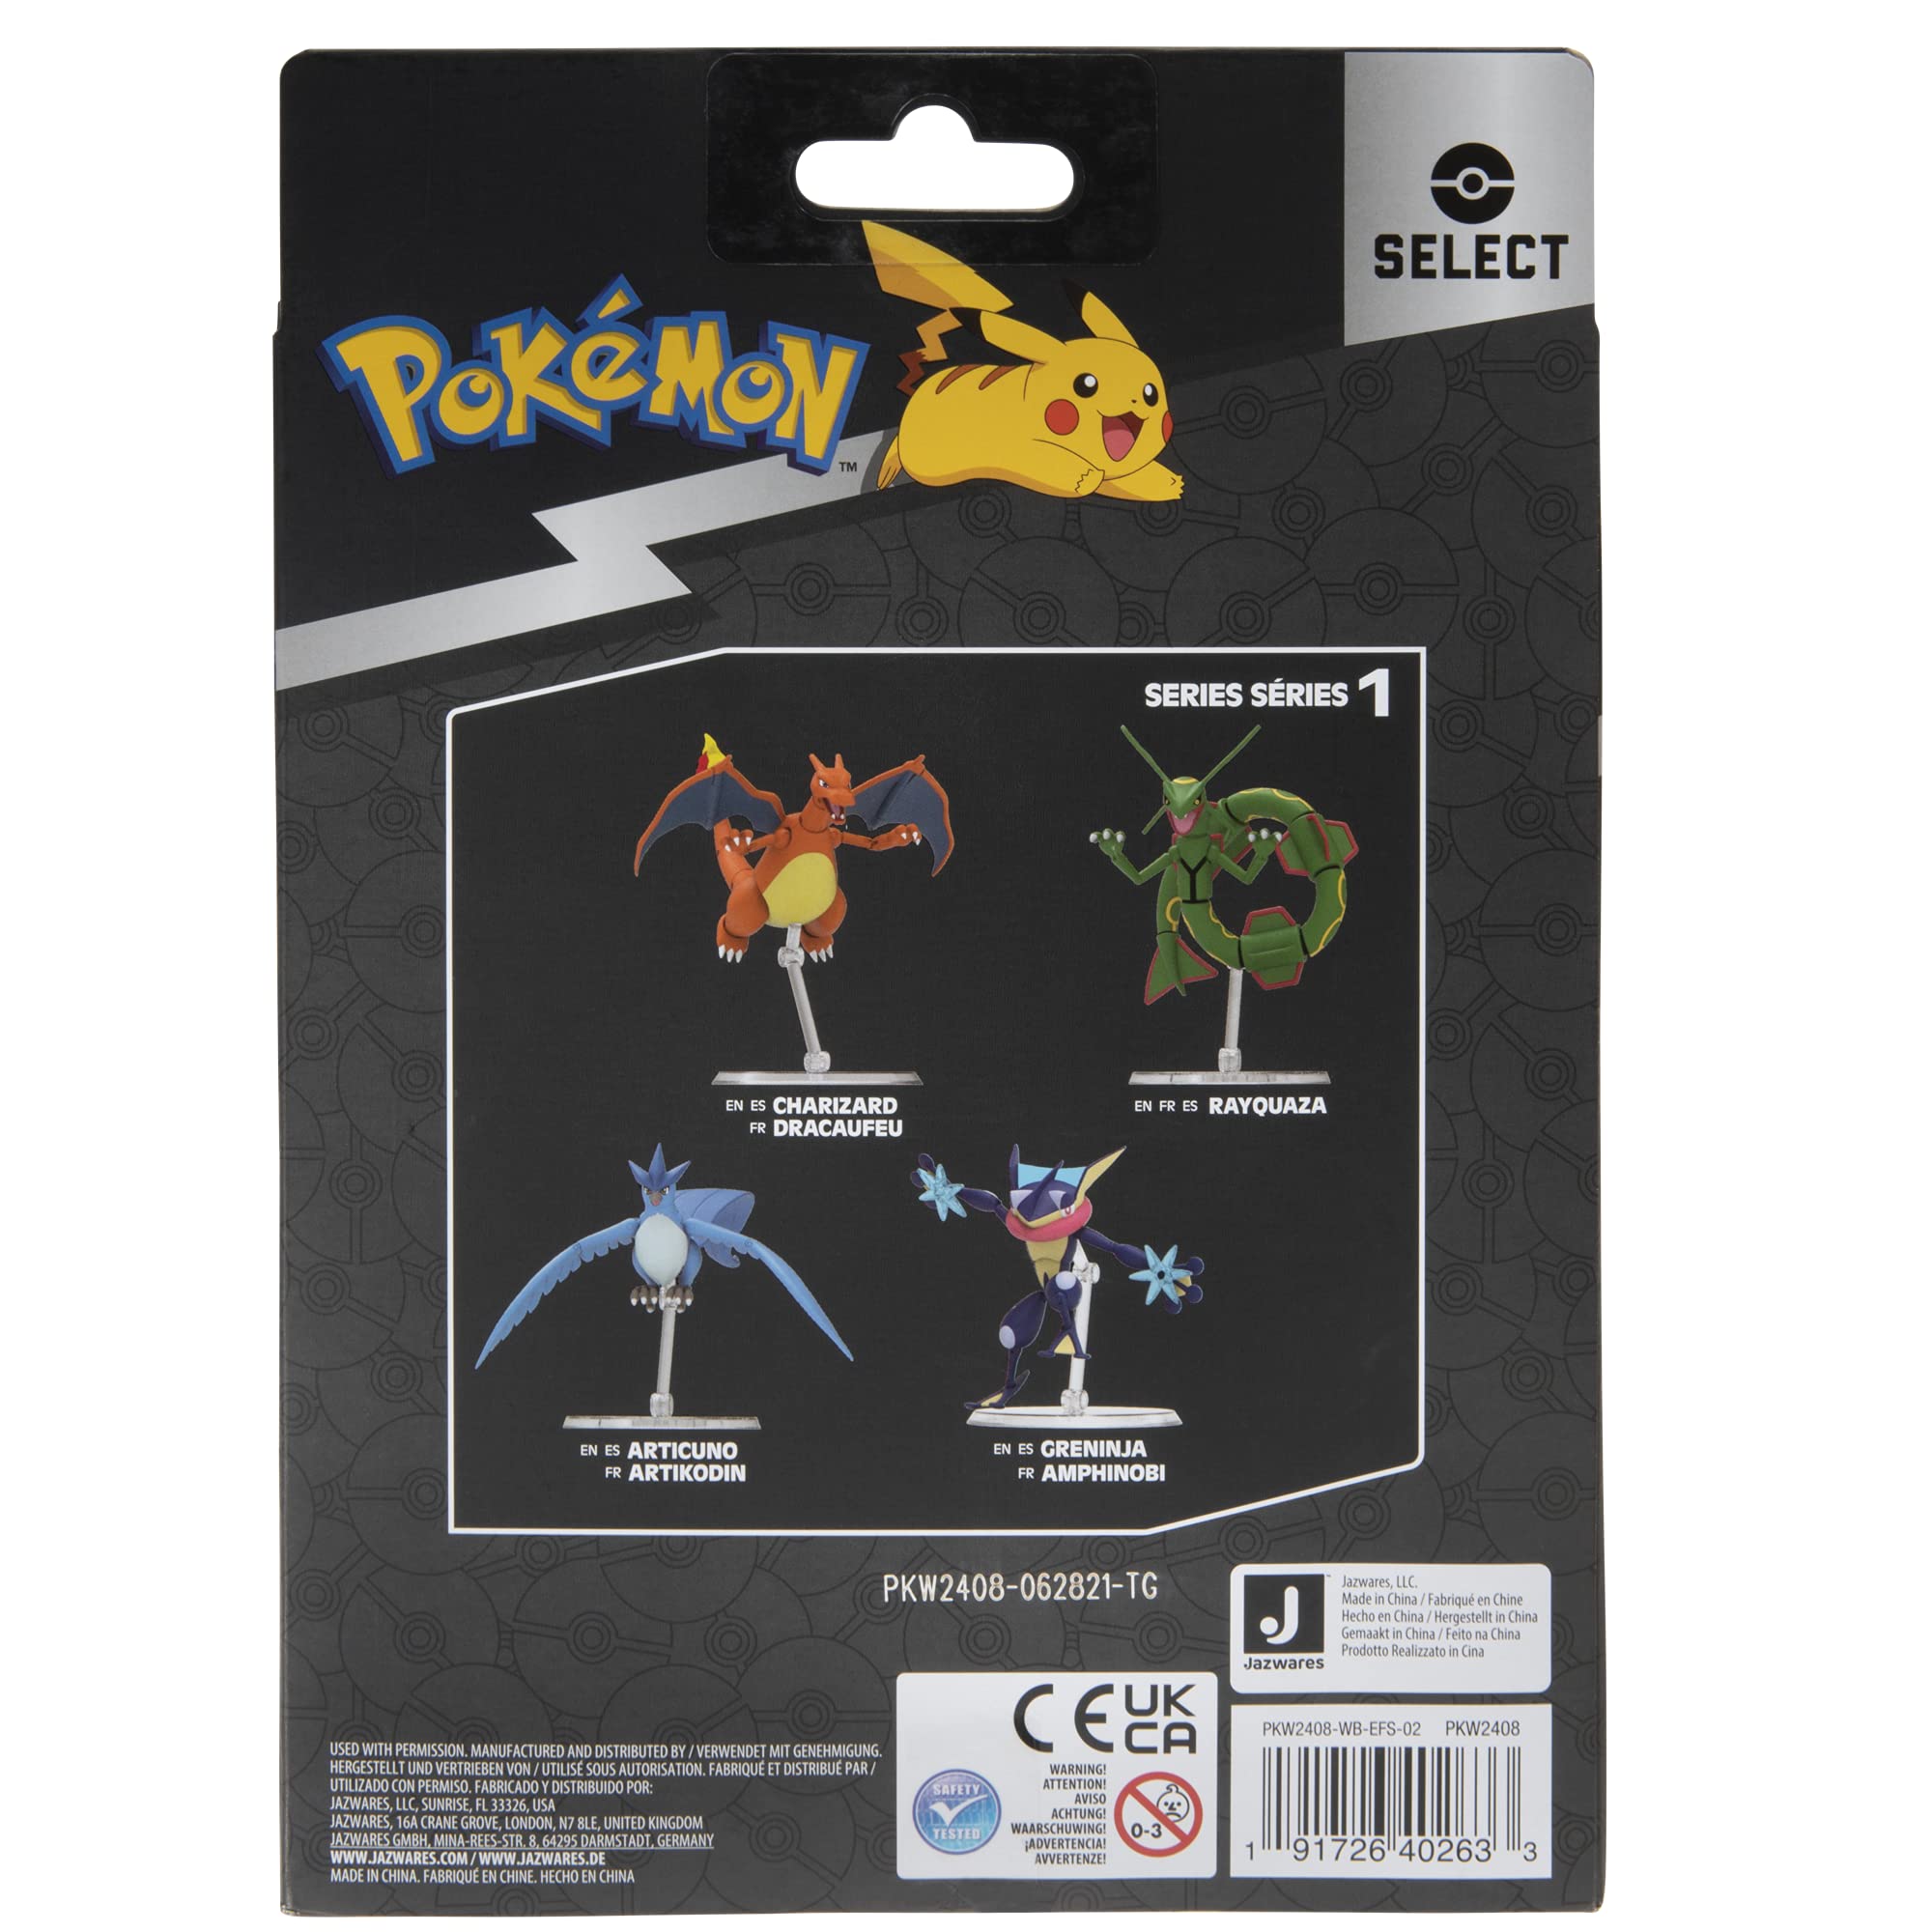 Pokemon Greninja, Super-Articulated 6-Inch Figure - Collect Your Favorite Pokémon Figures - Toys for Kids and Pokémon Fans